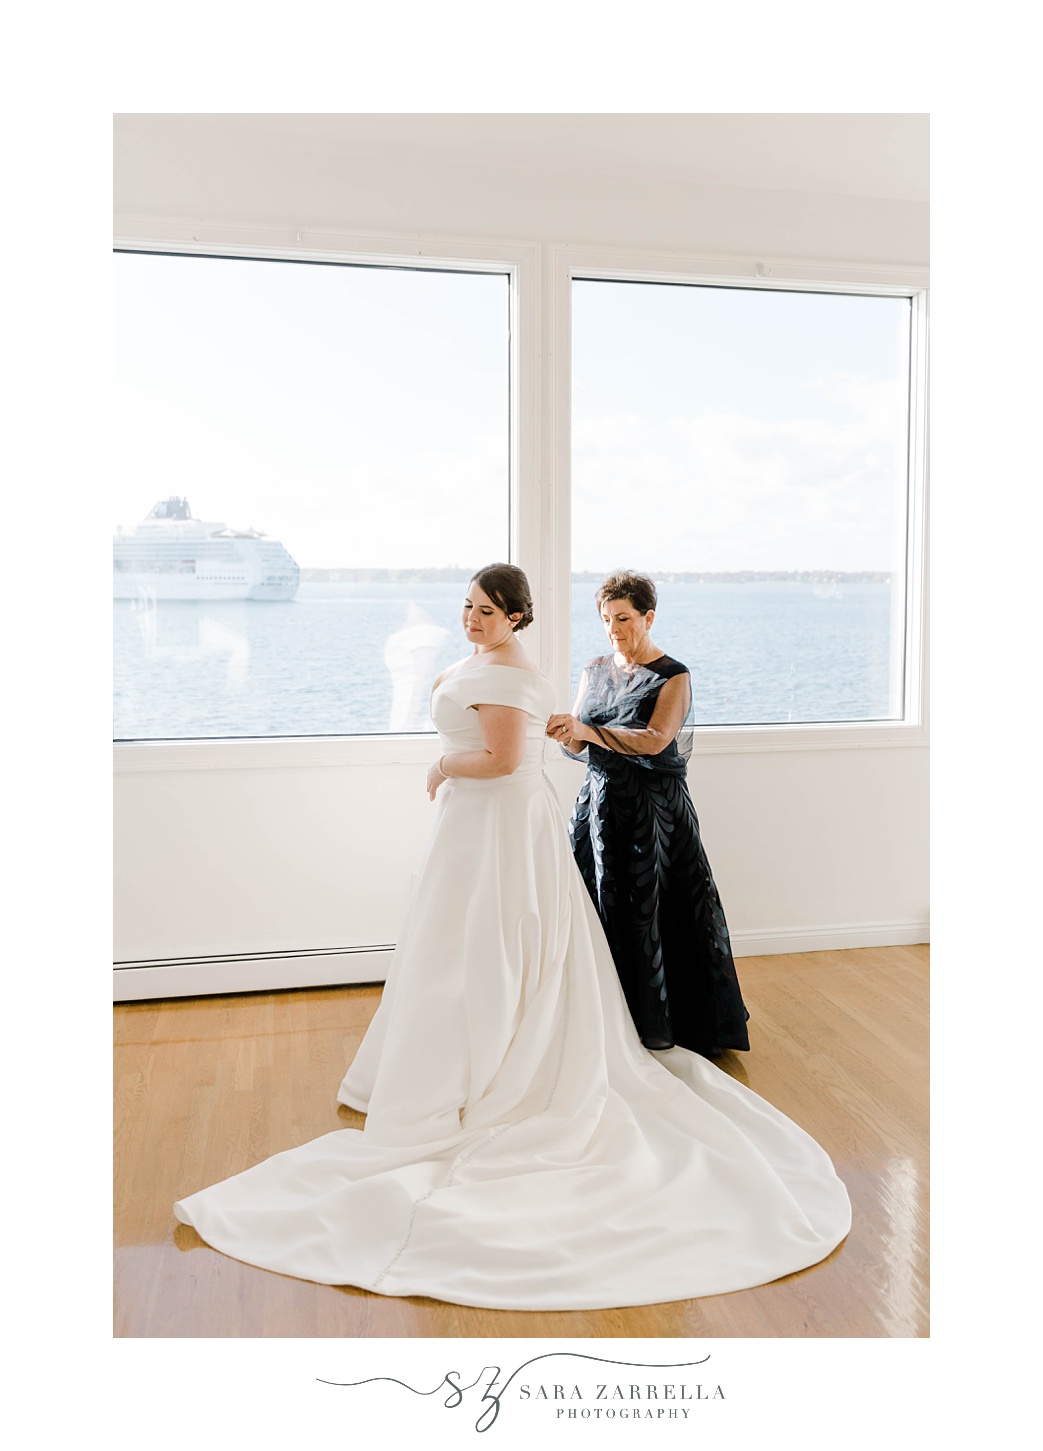 mother in navy gown helps bride into wedding dress by window in suite at Belle Mer